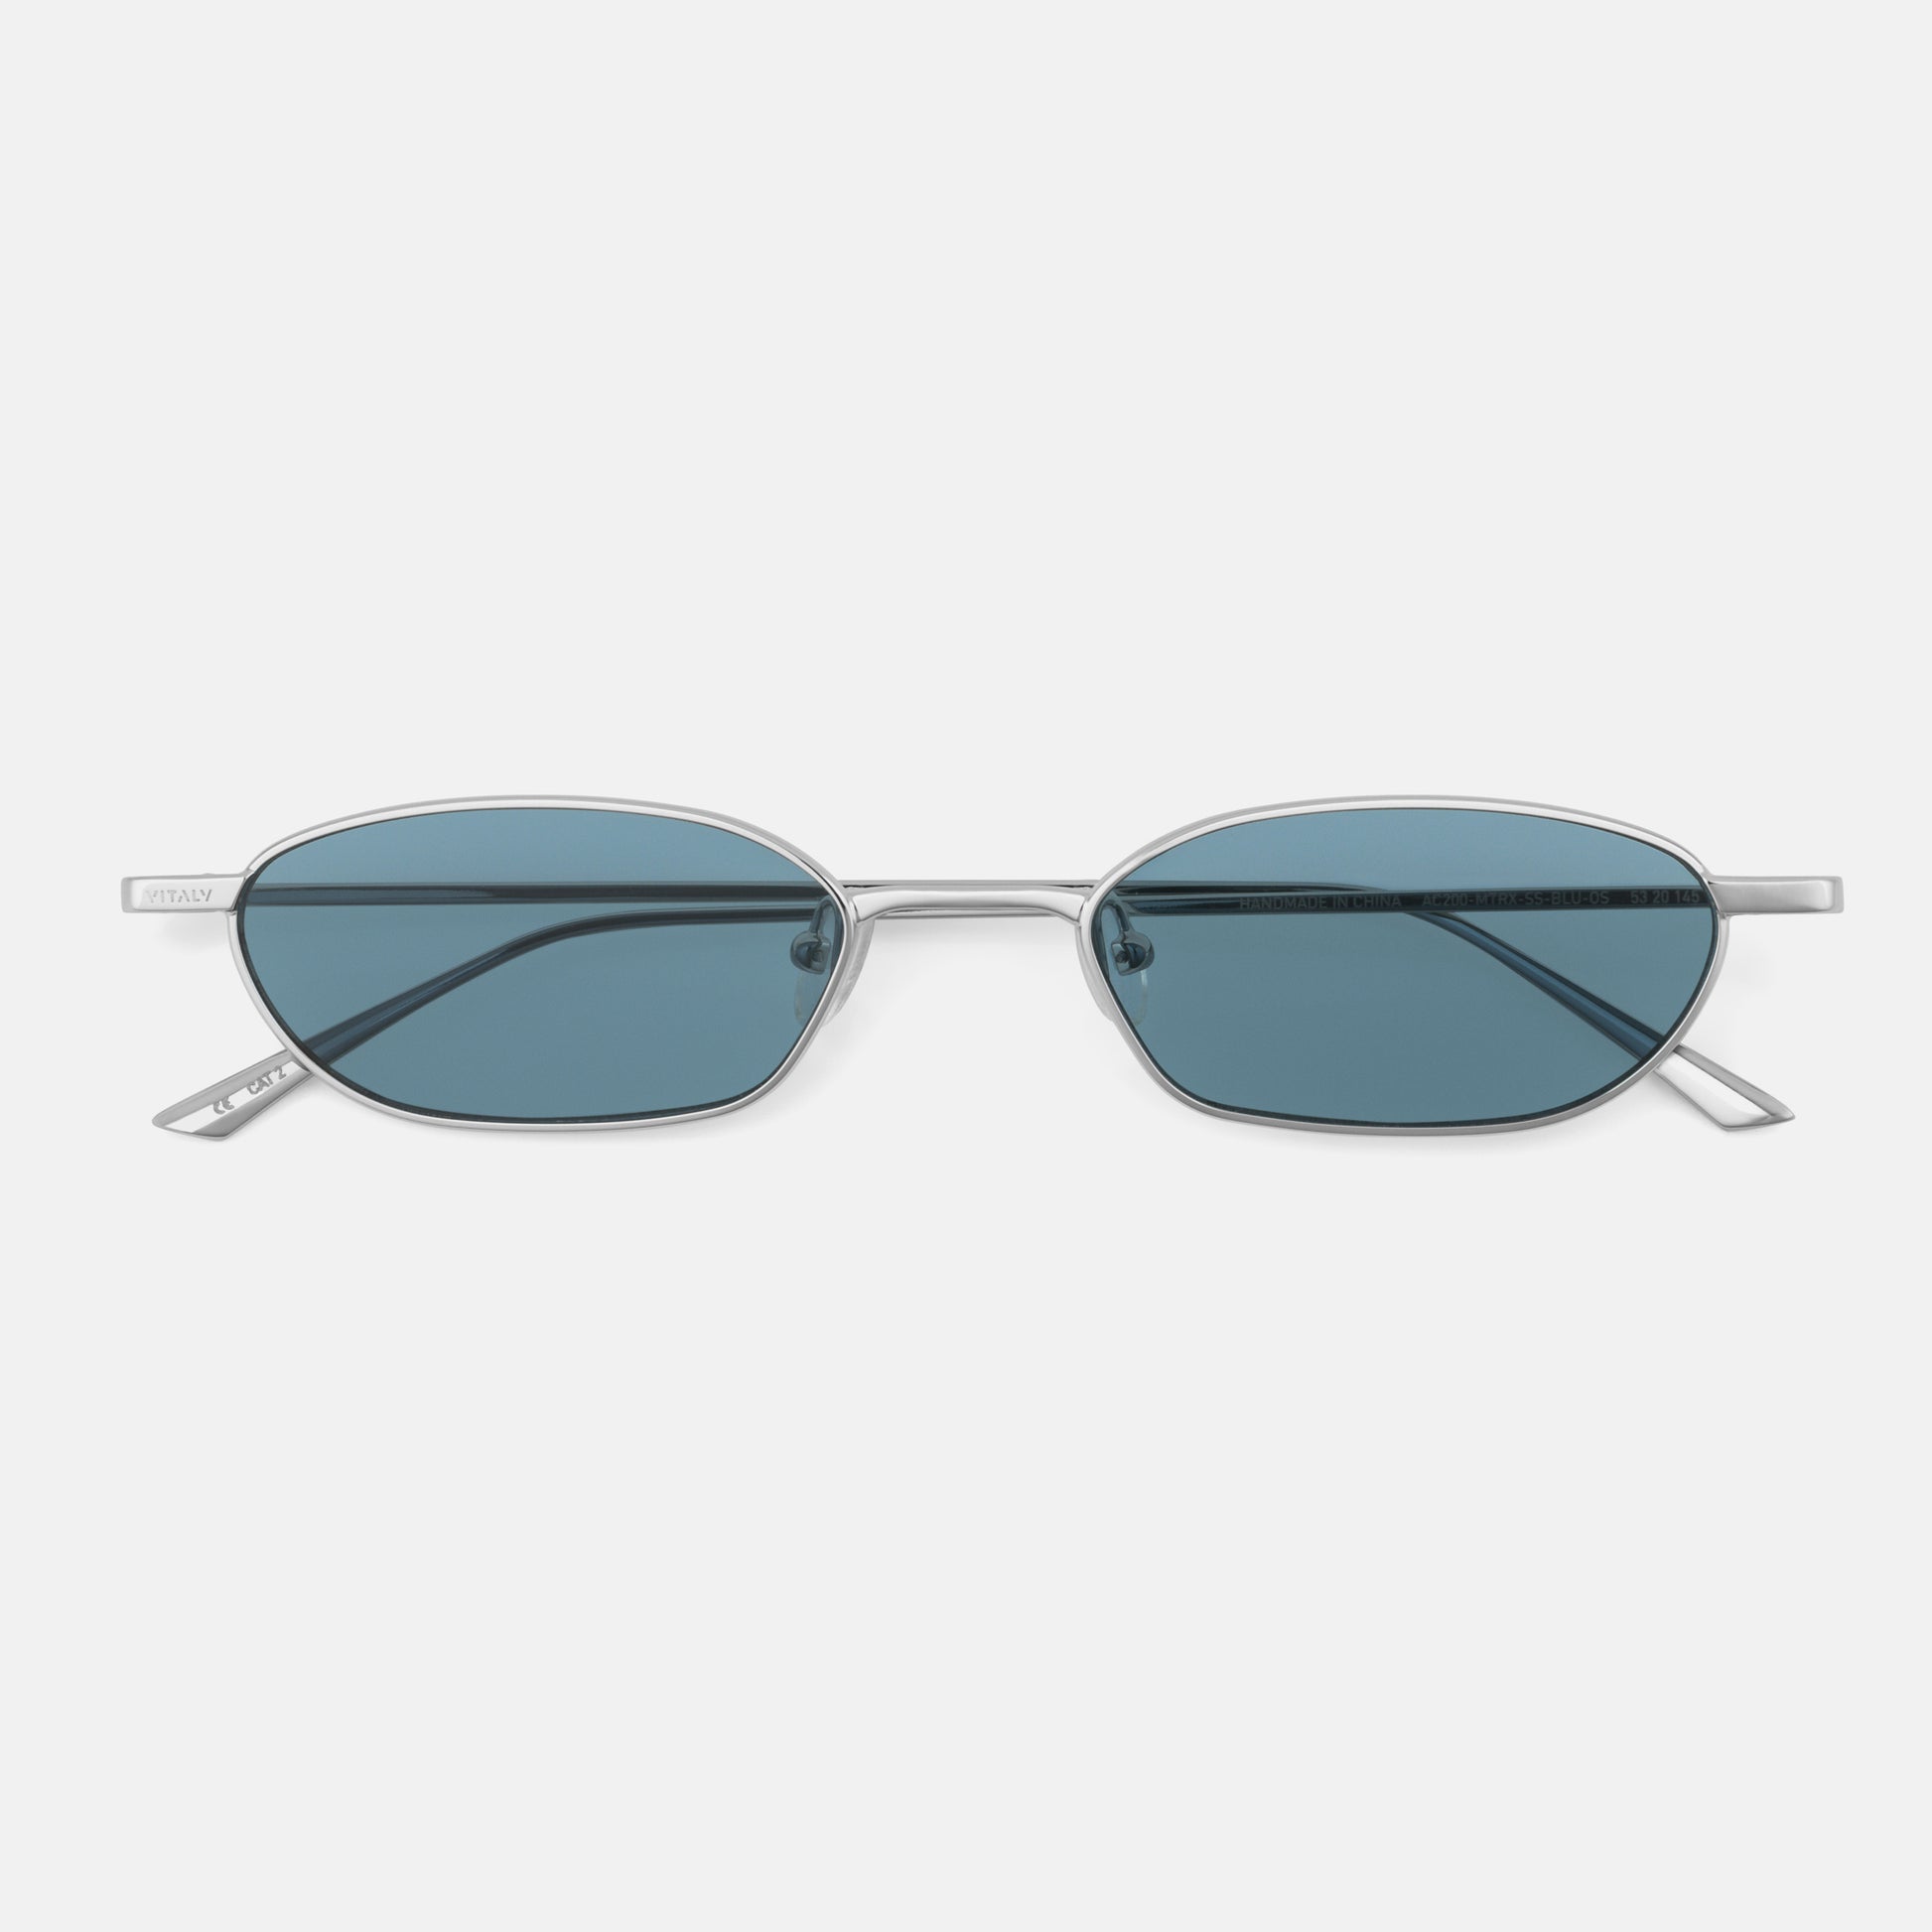 Vitaly Matrix Sunglasses  100% Recycled Stainless Steel Accessories